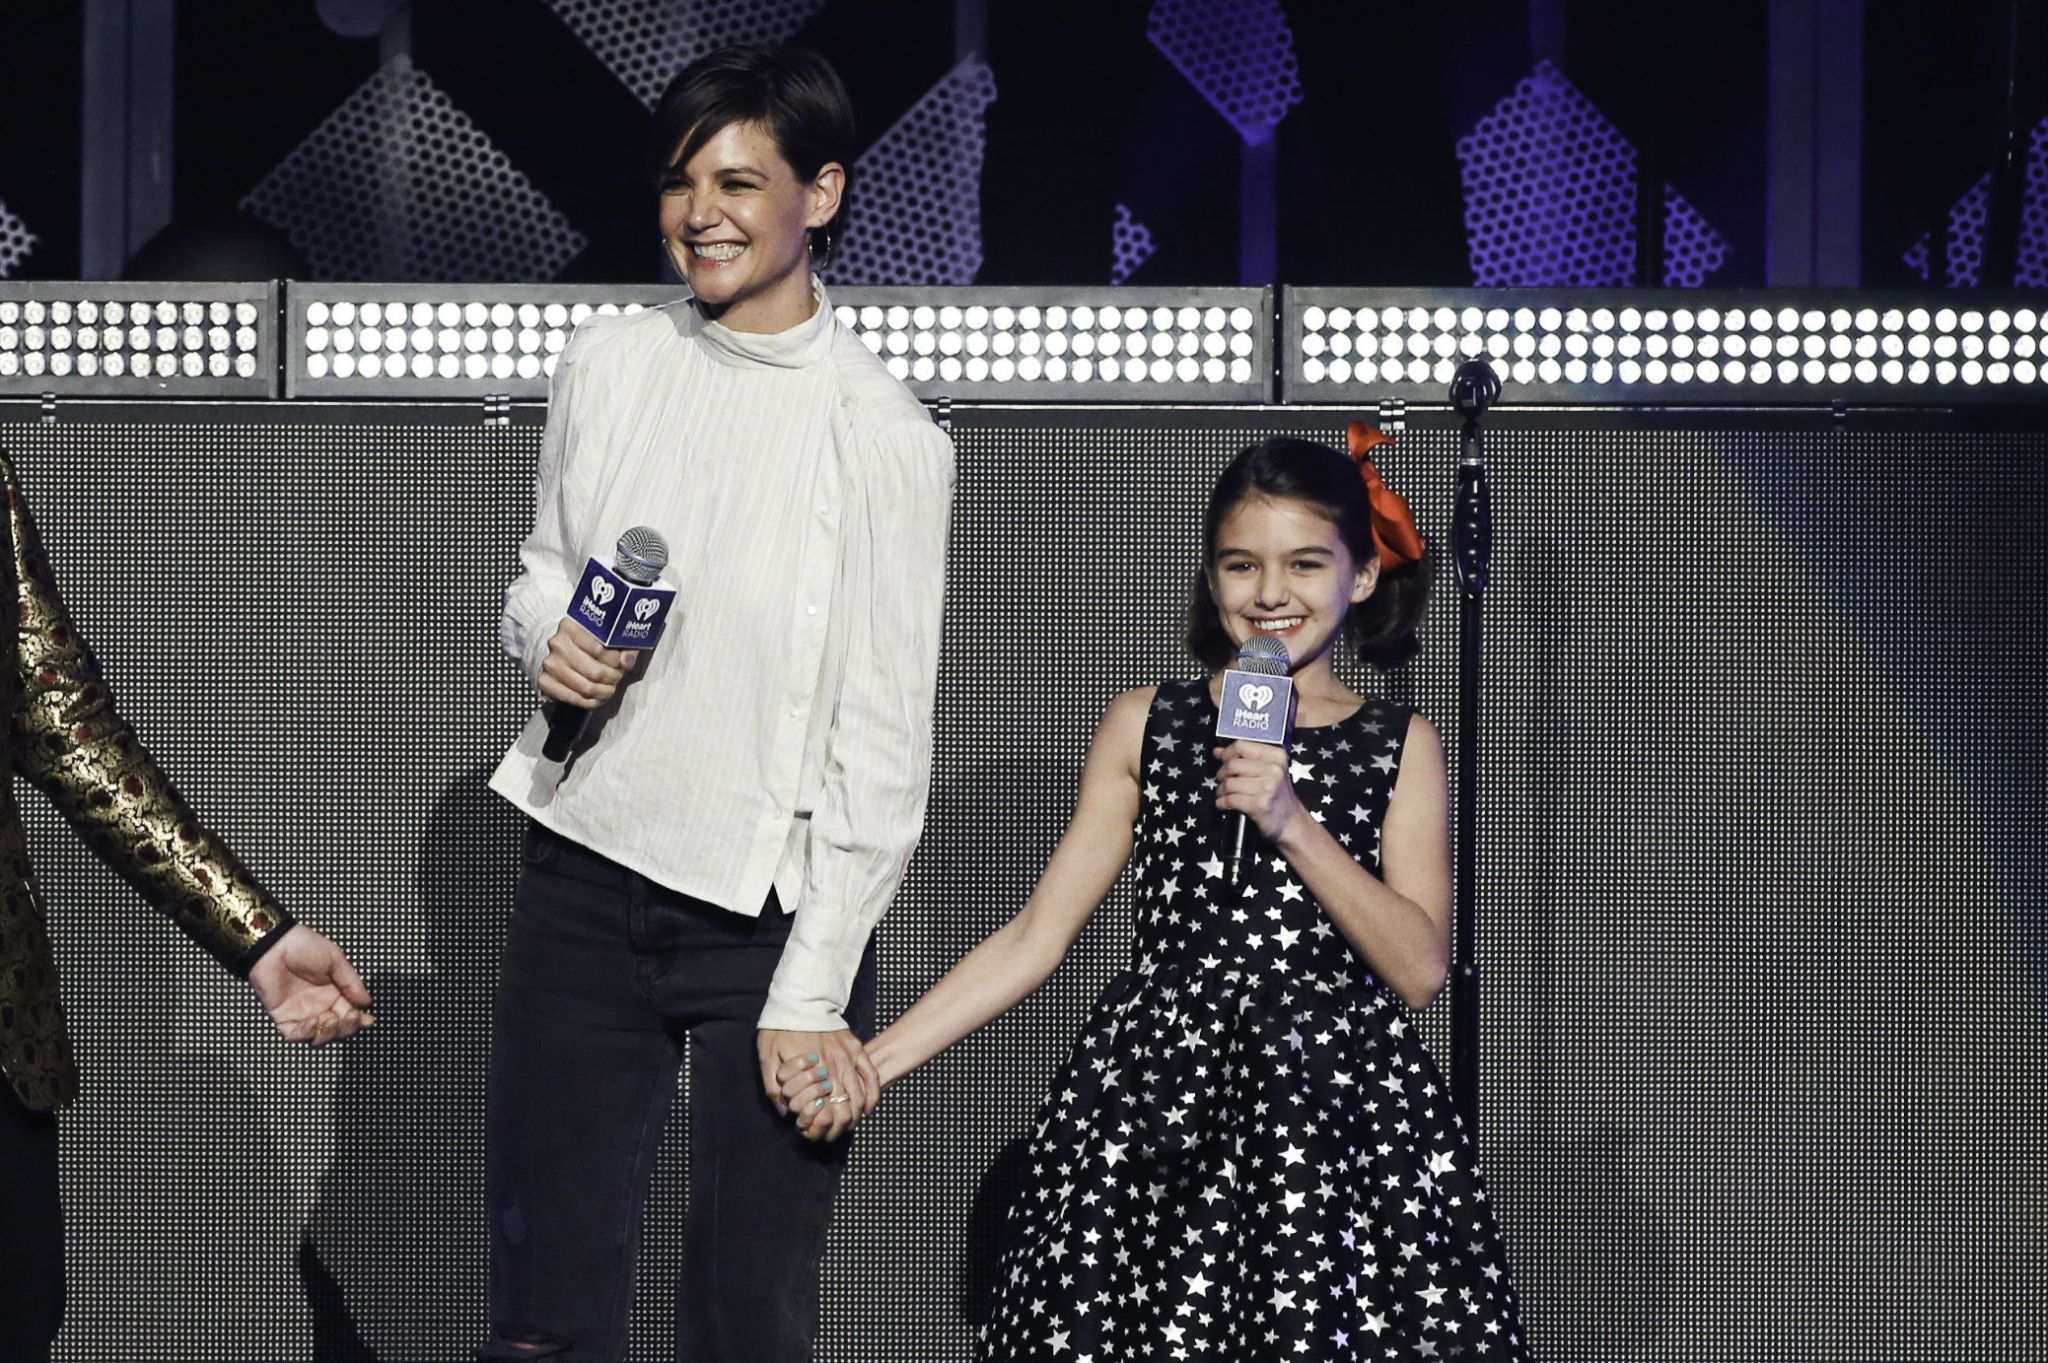 Katie Holmes and Suri Cruise perform during the 2017 Z100 Jingle Ball at Madison Square Garden